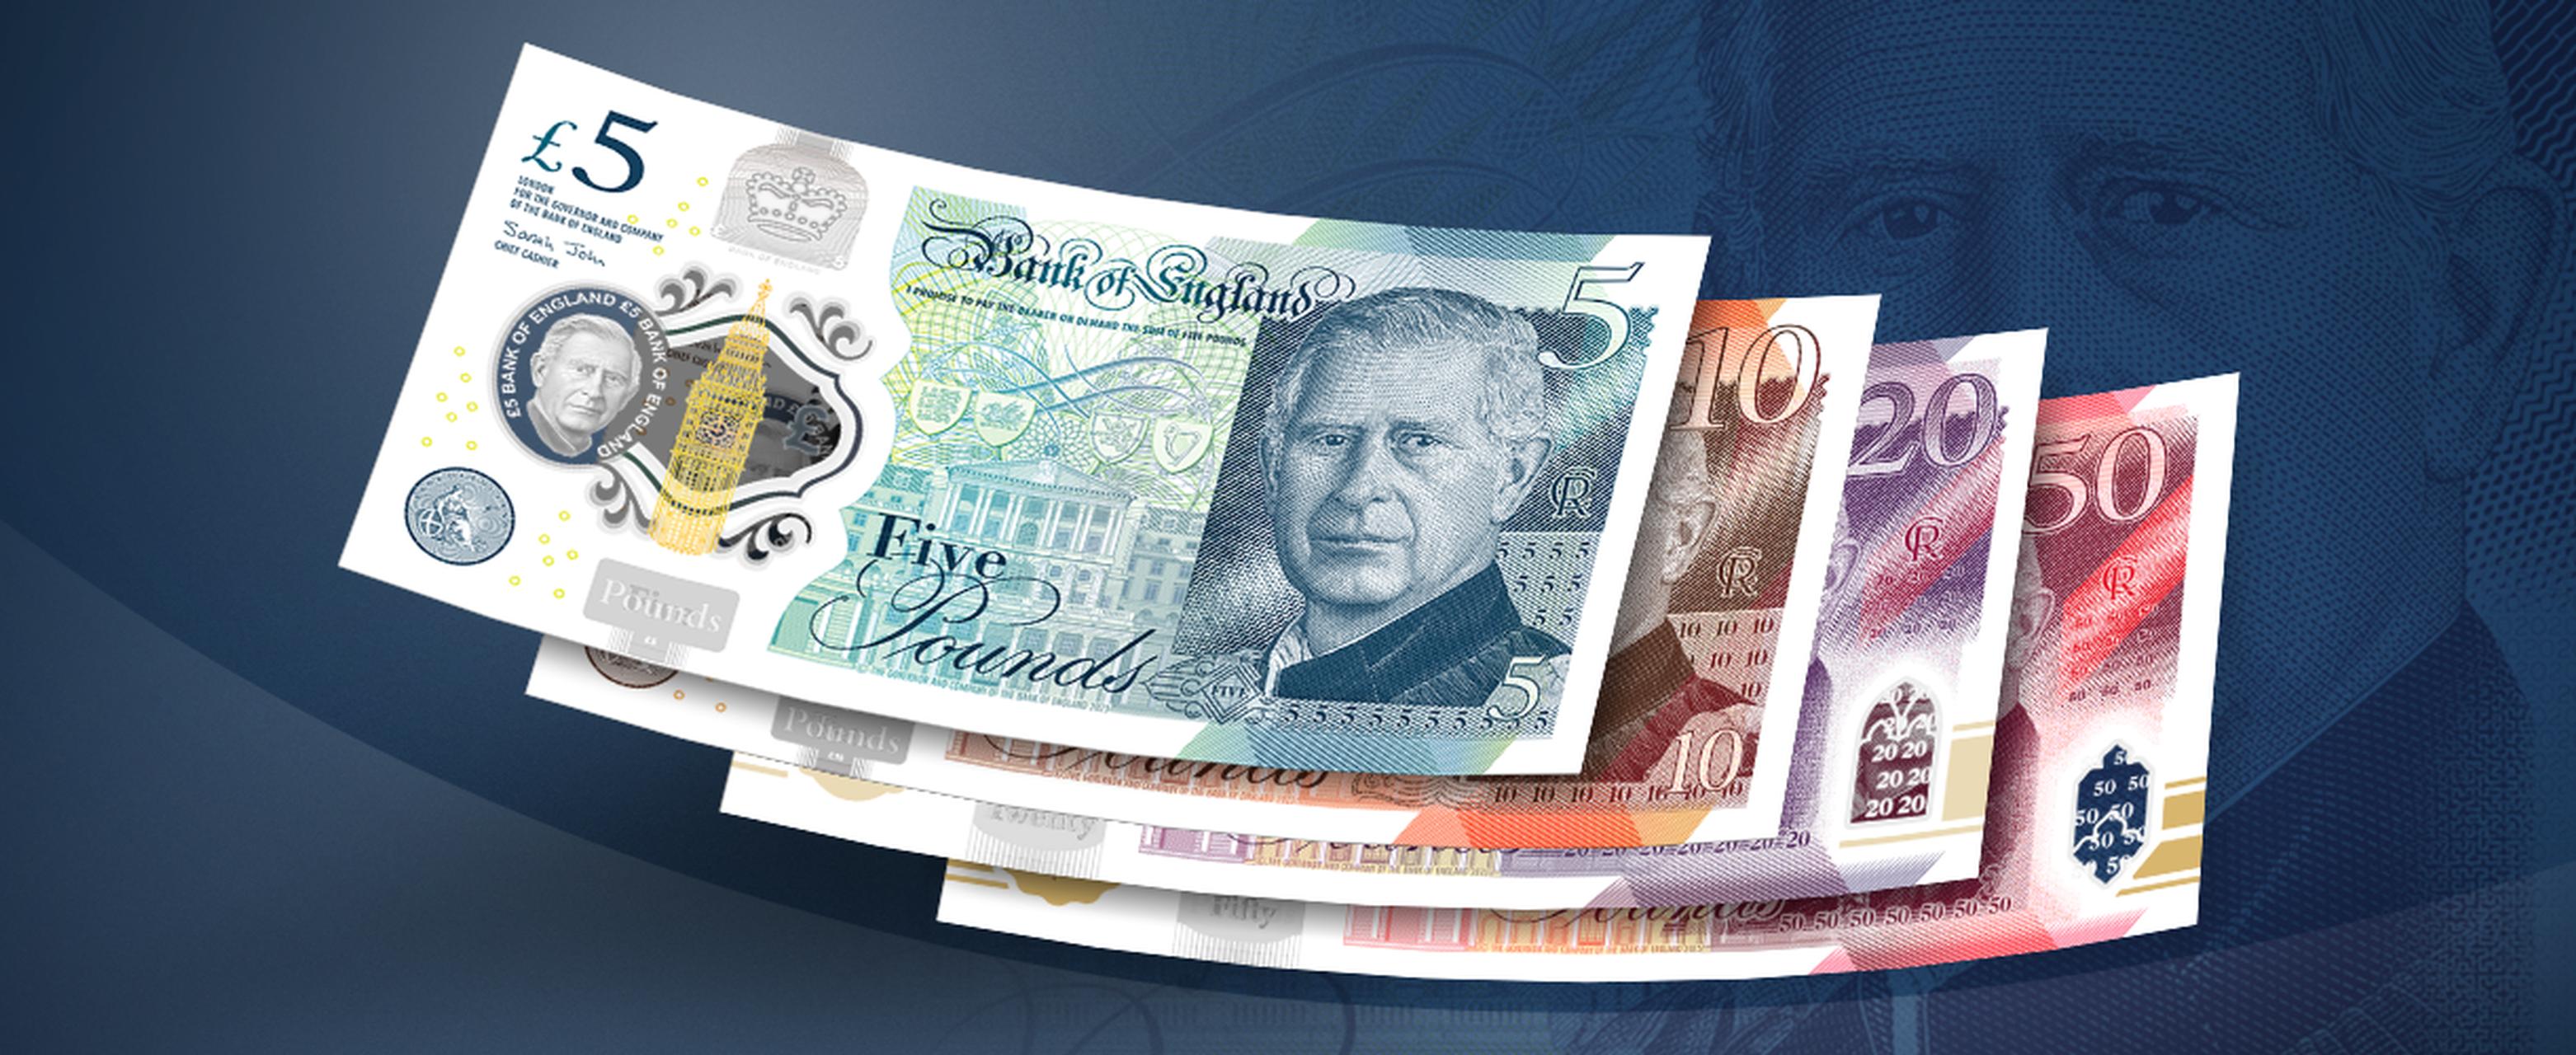 The King Charles III banknotes